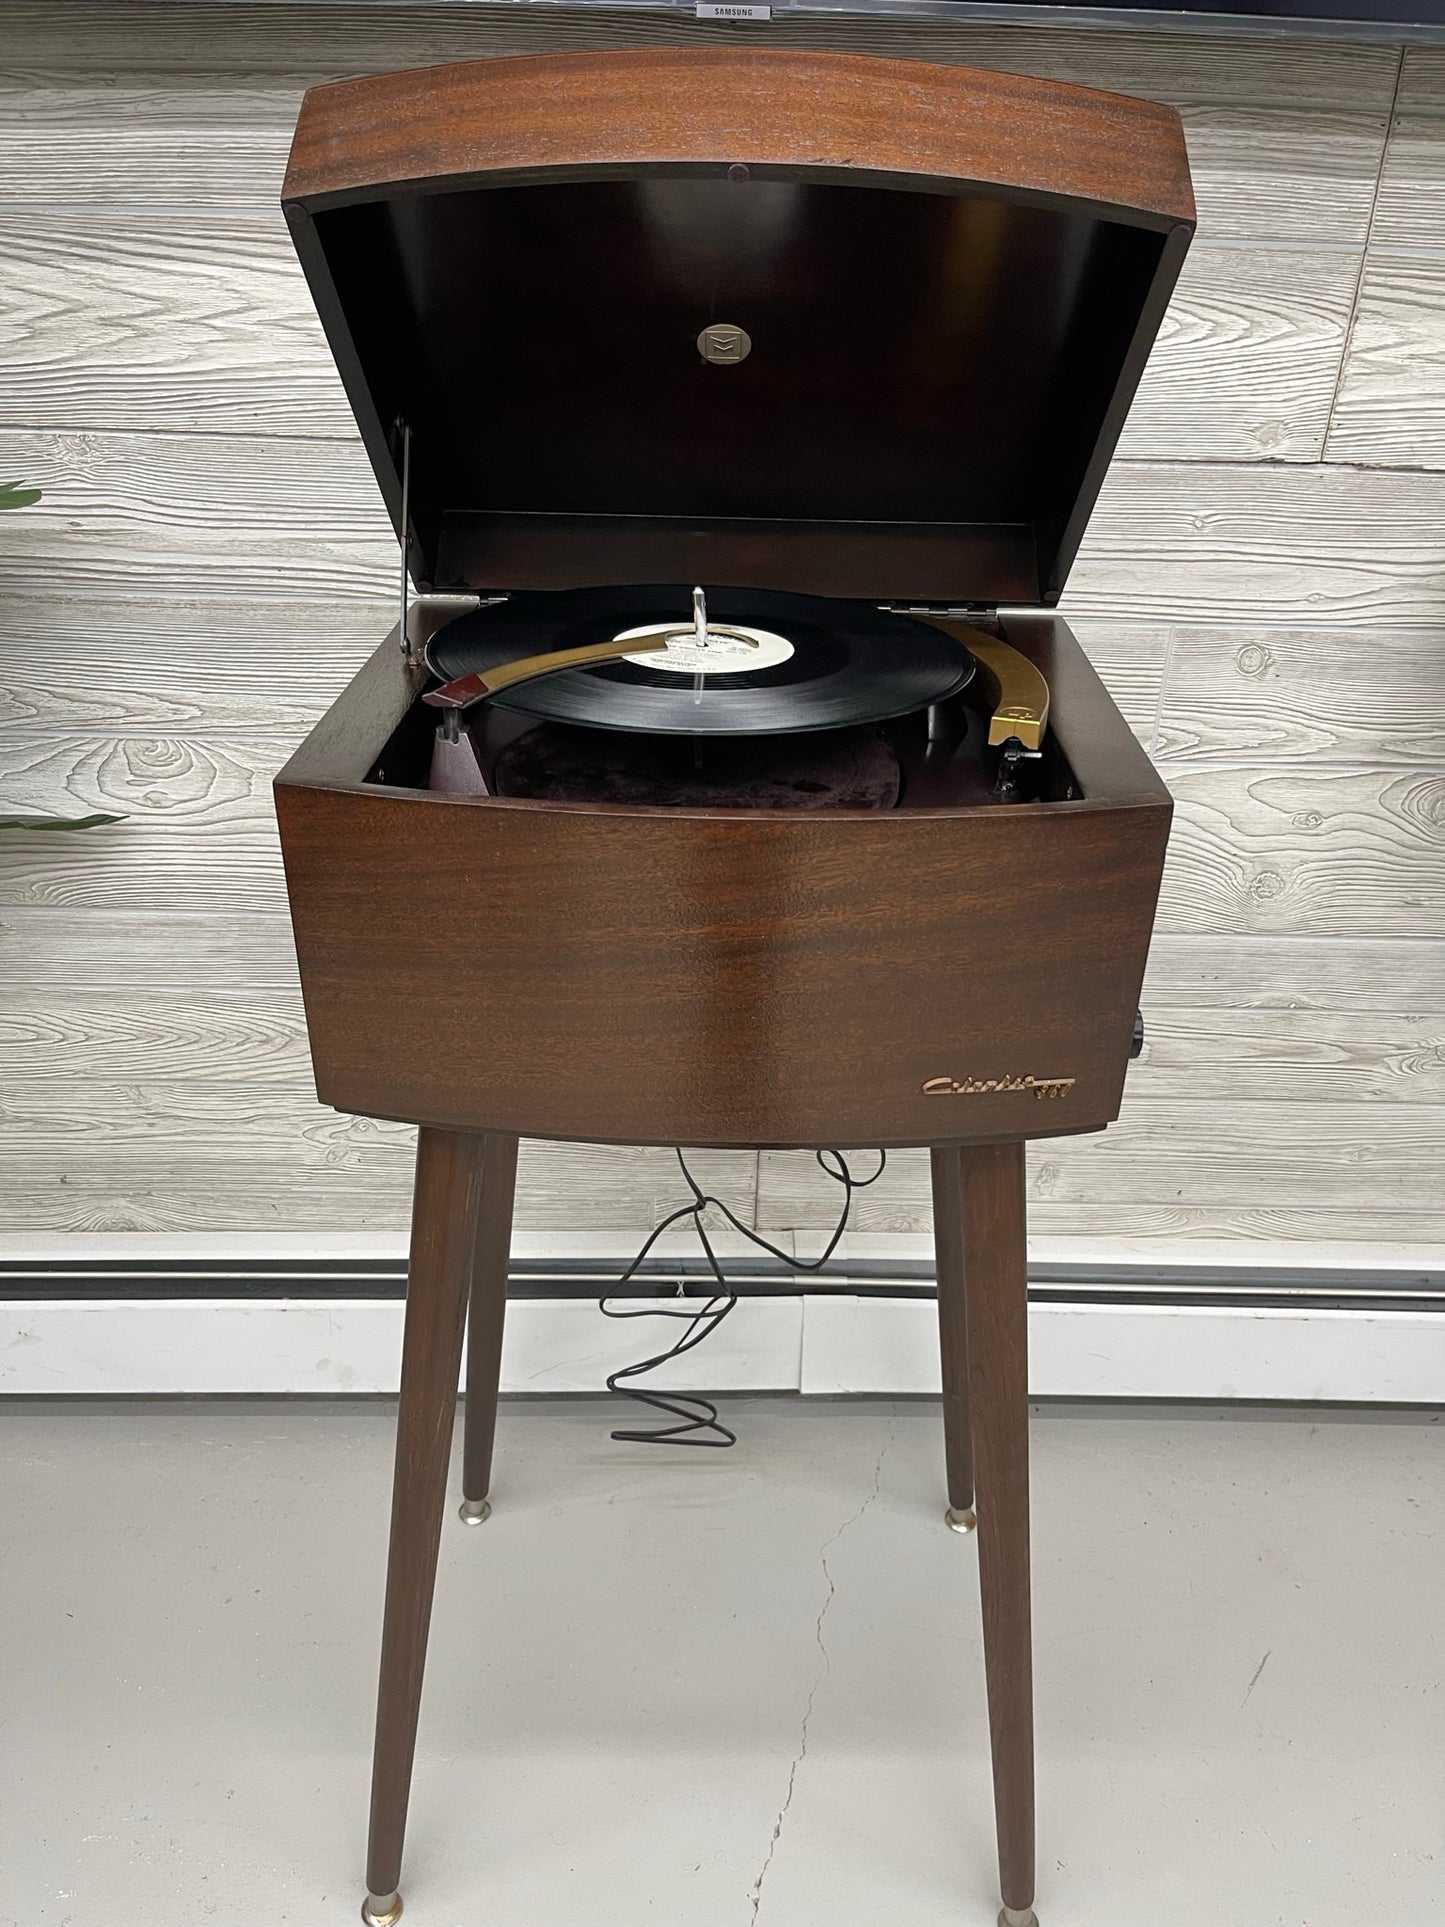 COLUMBIA 360 Mid Century Vintage Record Player Changer The Vintedge Co.